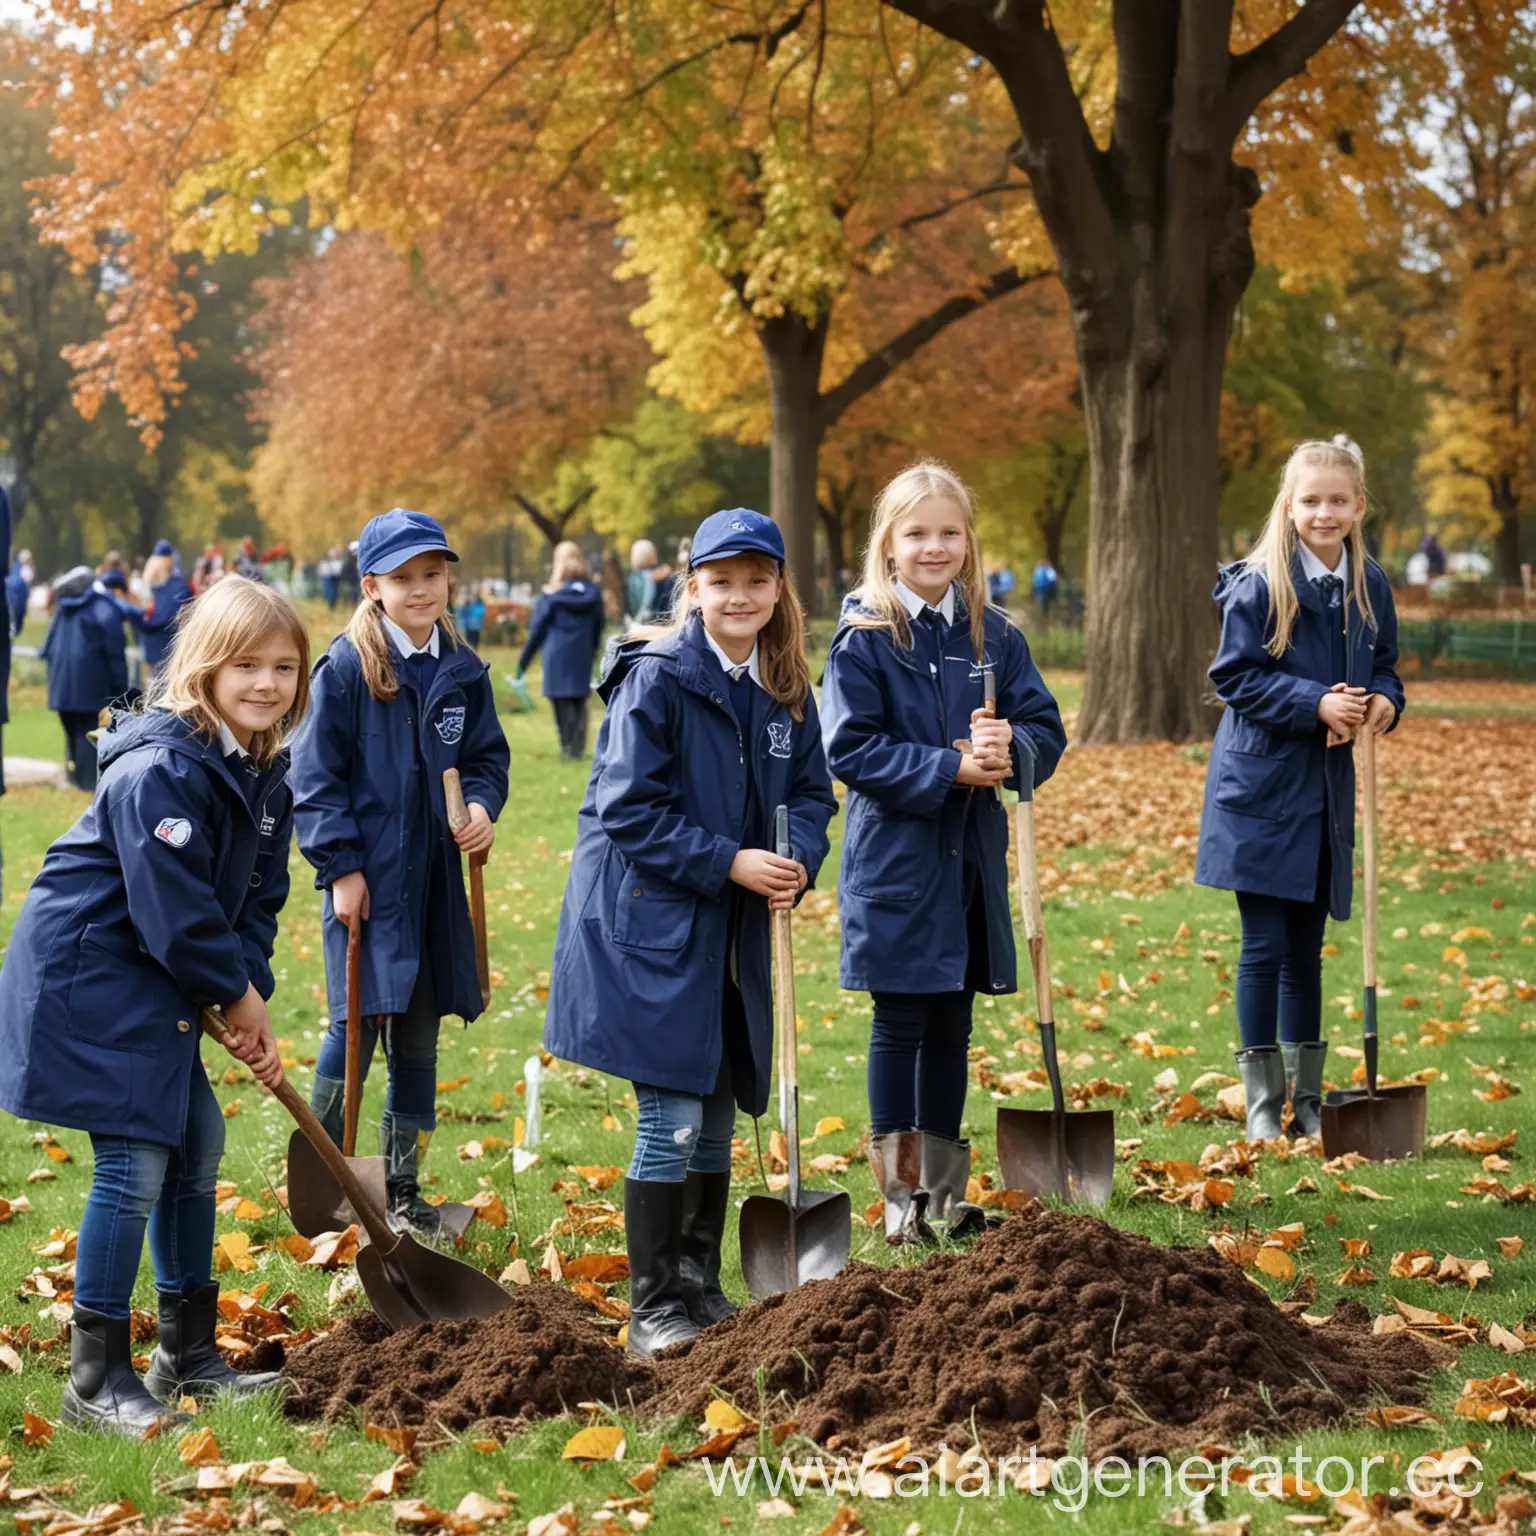 Teenage-Environmentalists-Planting-Trees-in-Autumn-Park